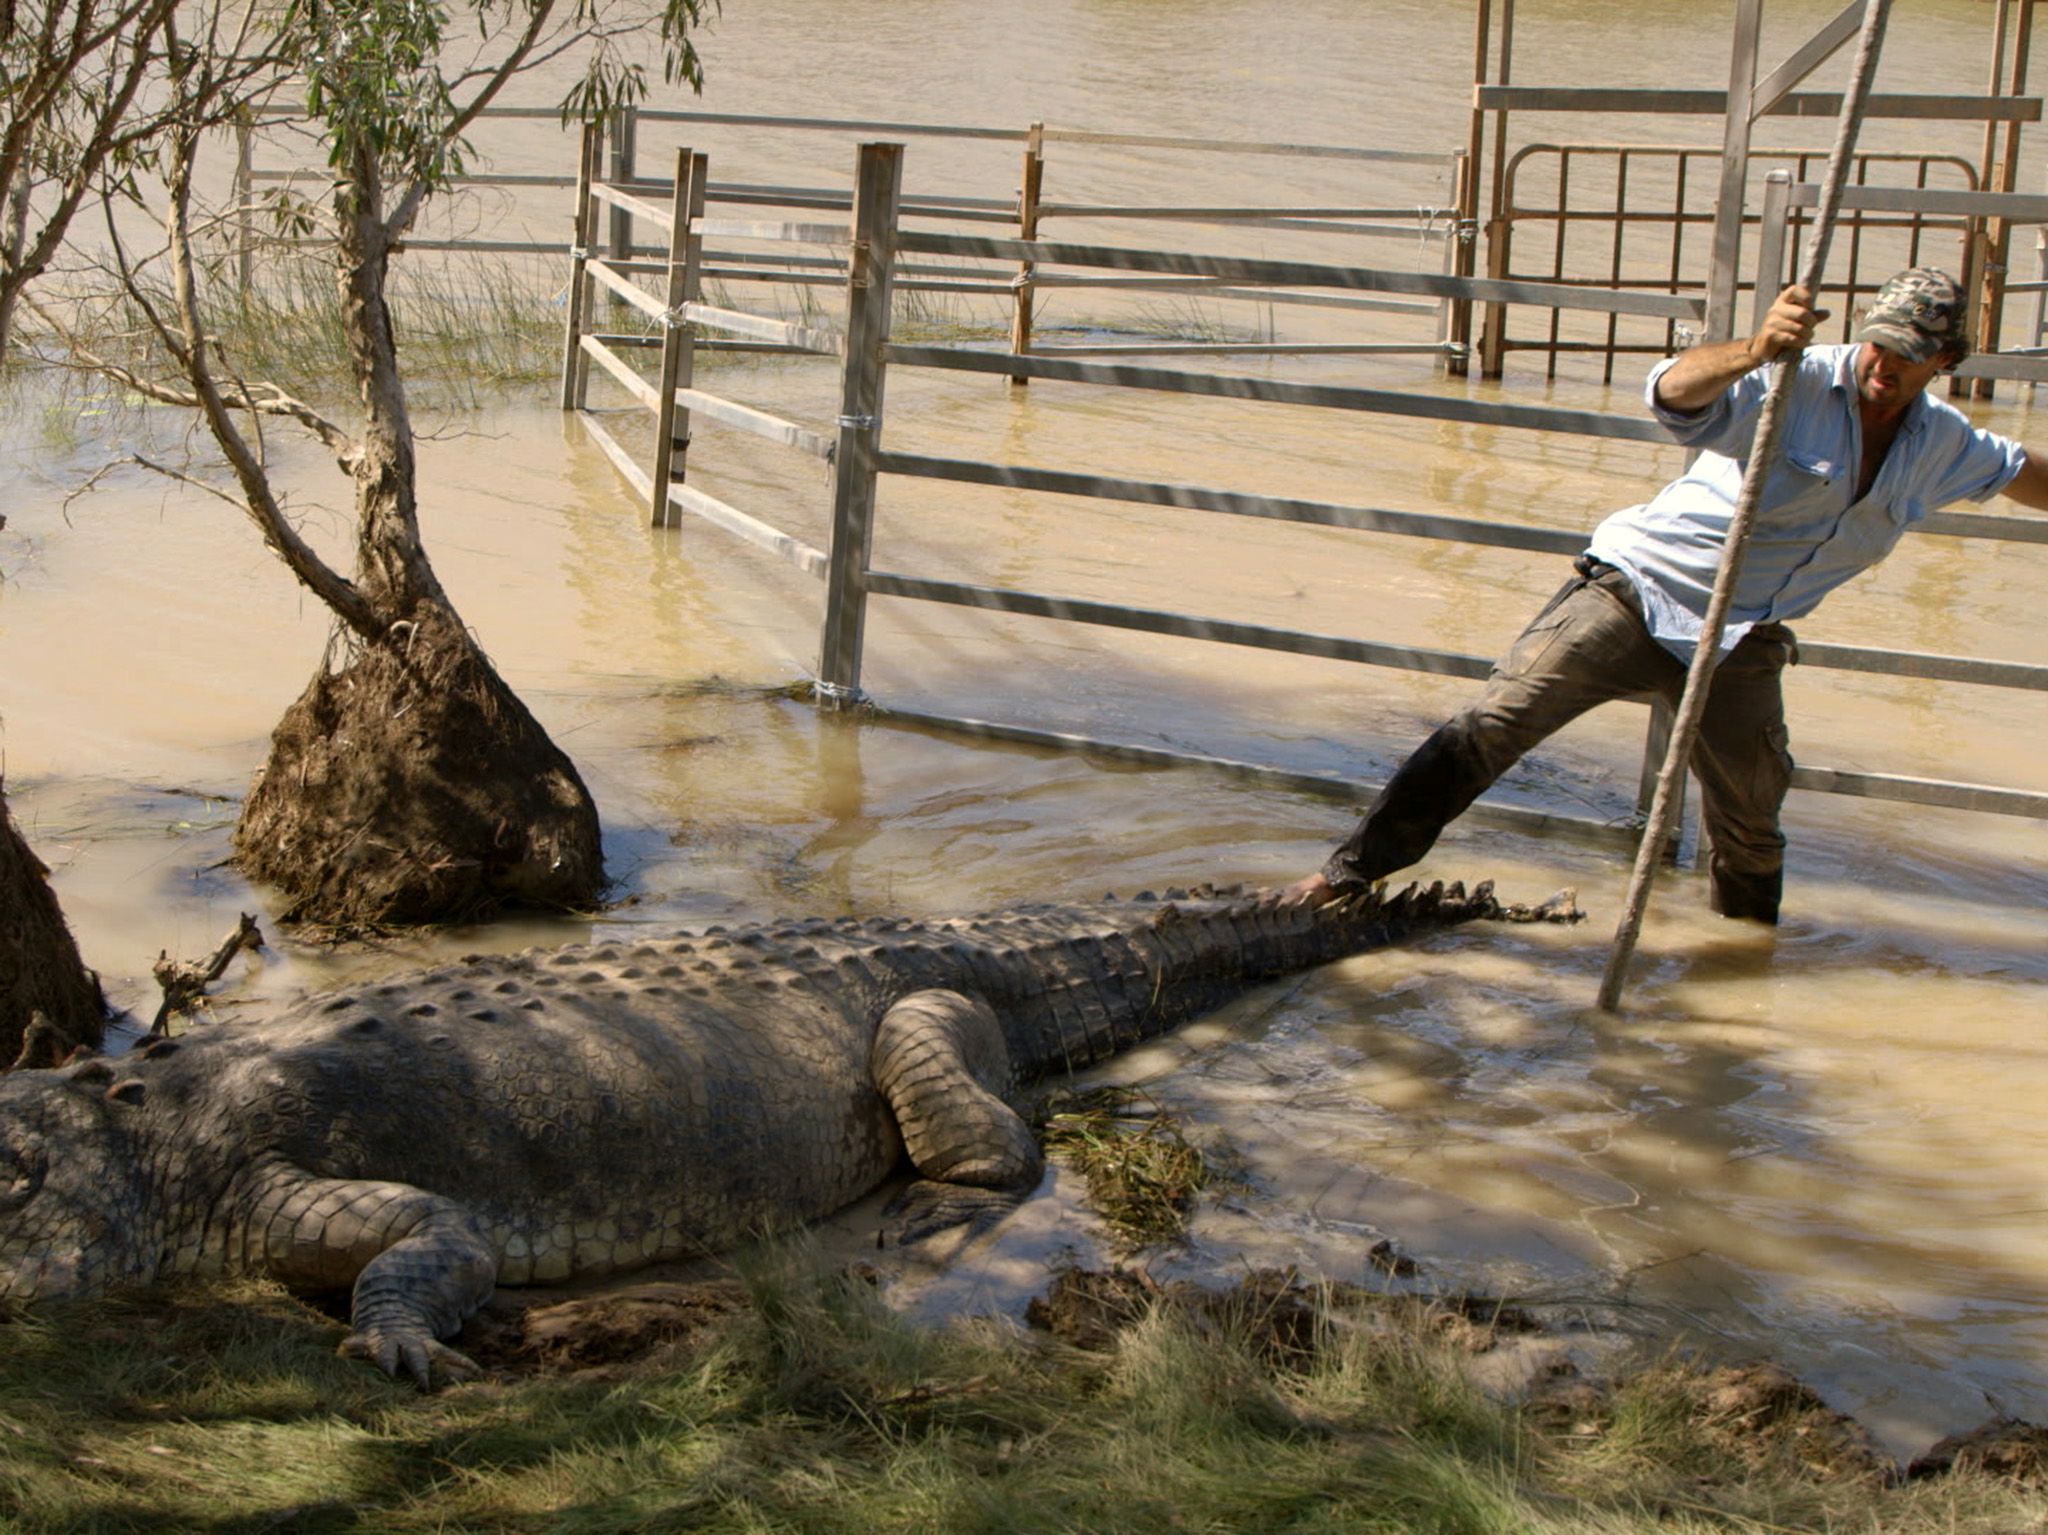 Northern Territory, Australia:  Matt Wright wrangles the crocodile.  This image is from Monster... [Photo of the day - November 2019]